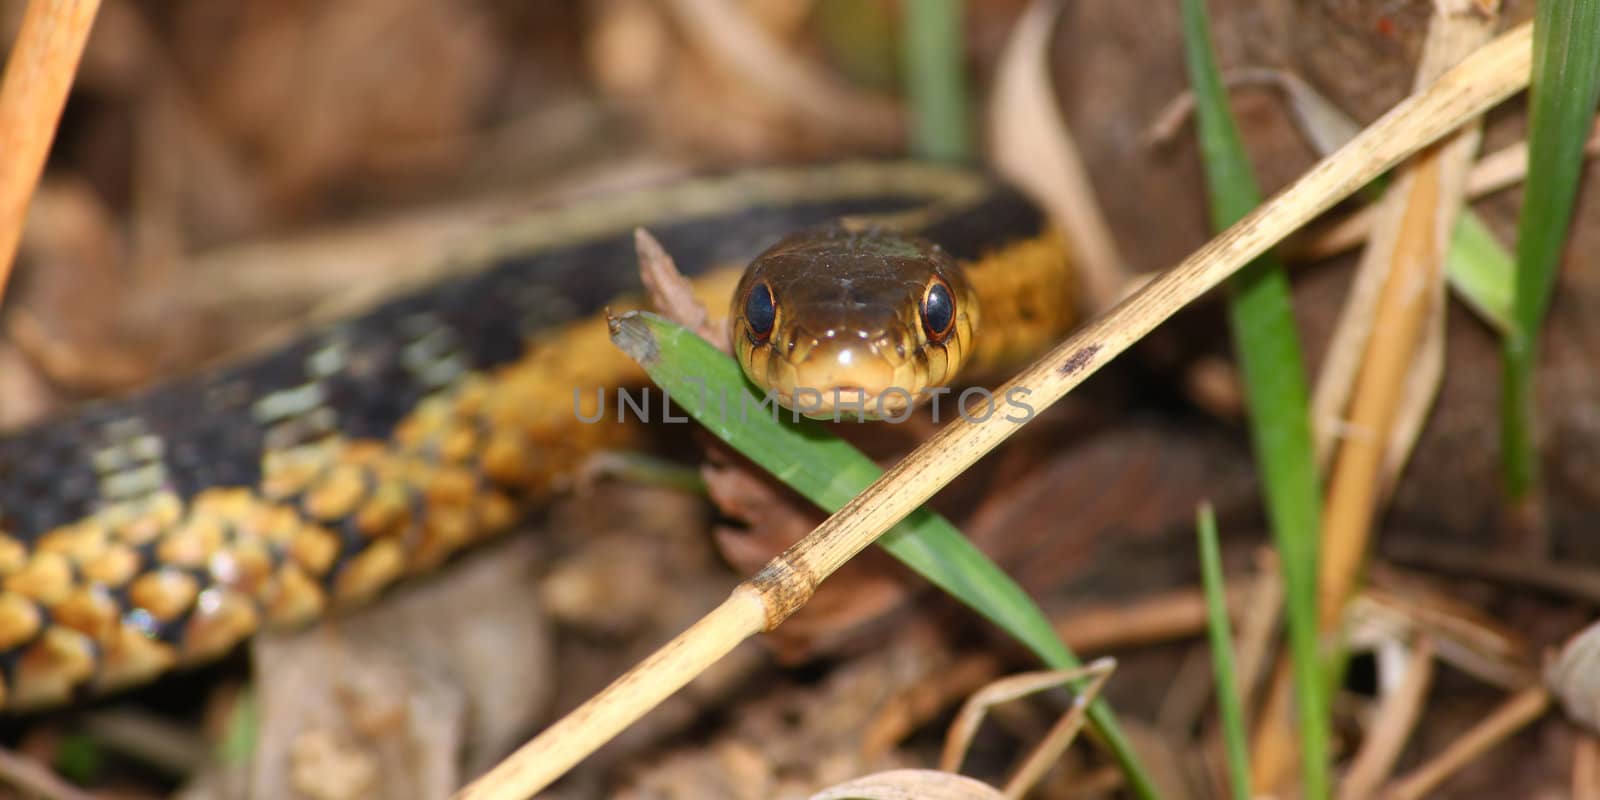 Garter Snake (Thamnophis sirtalis) found in the midwestern USA.